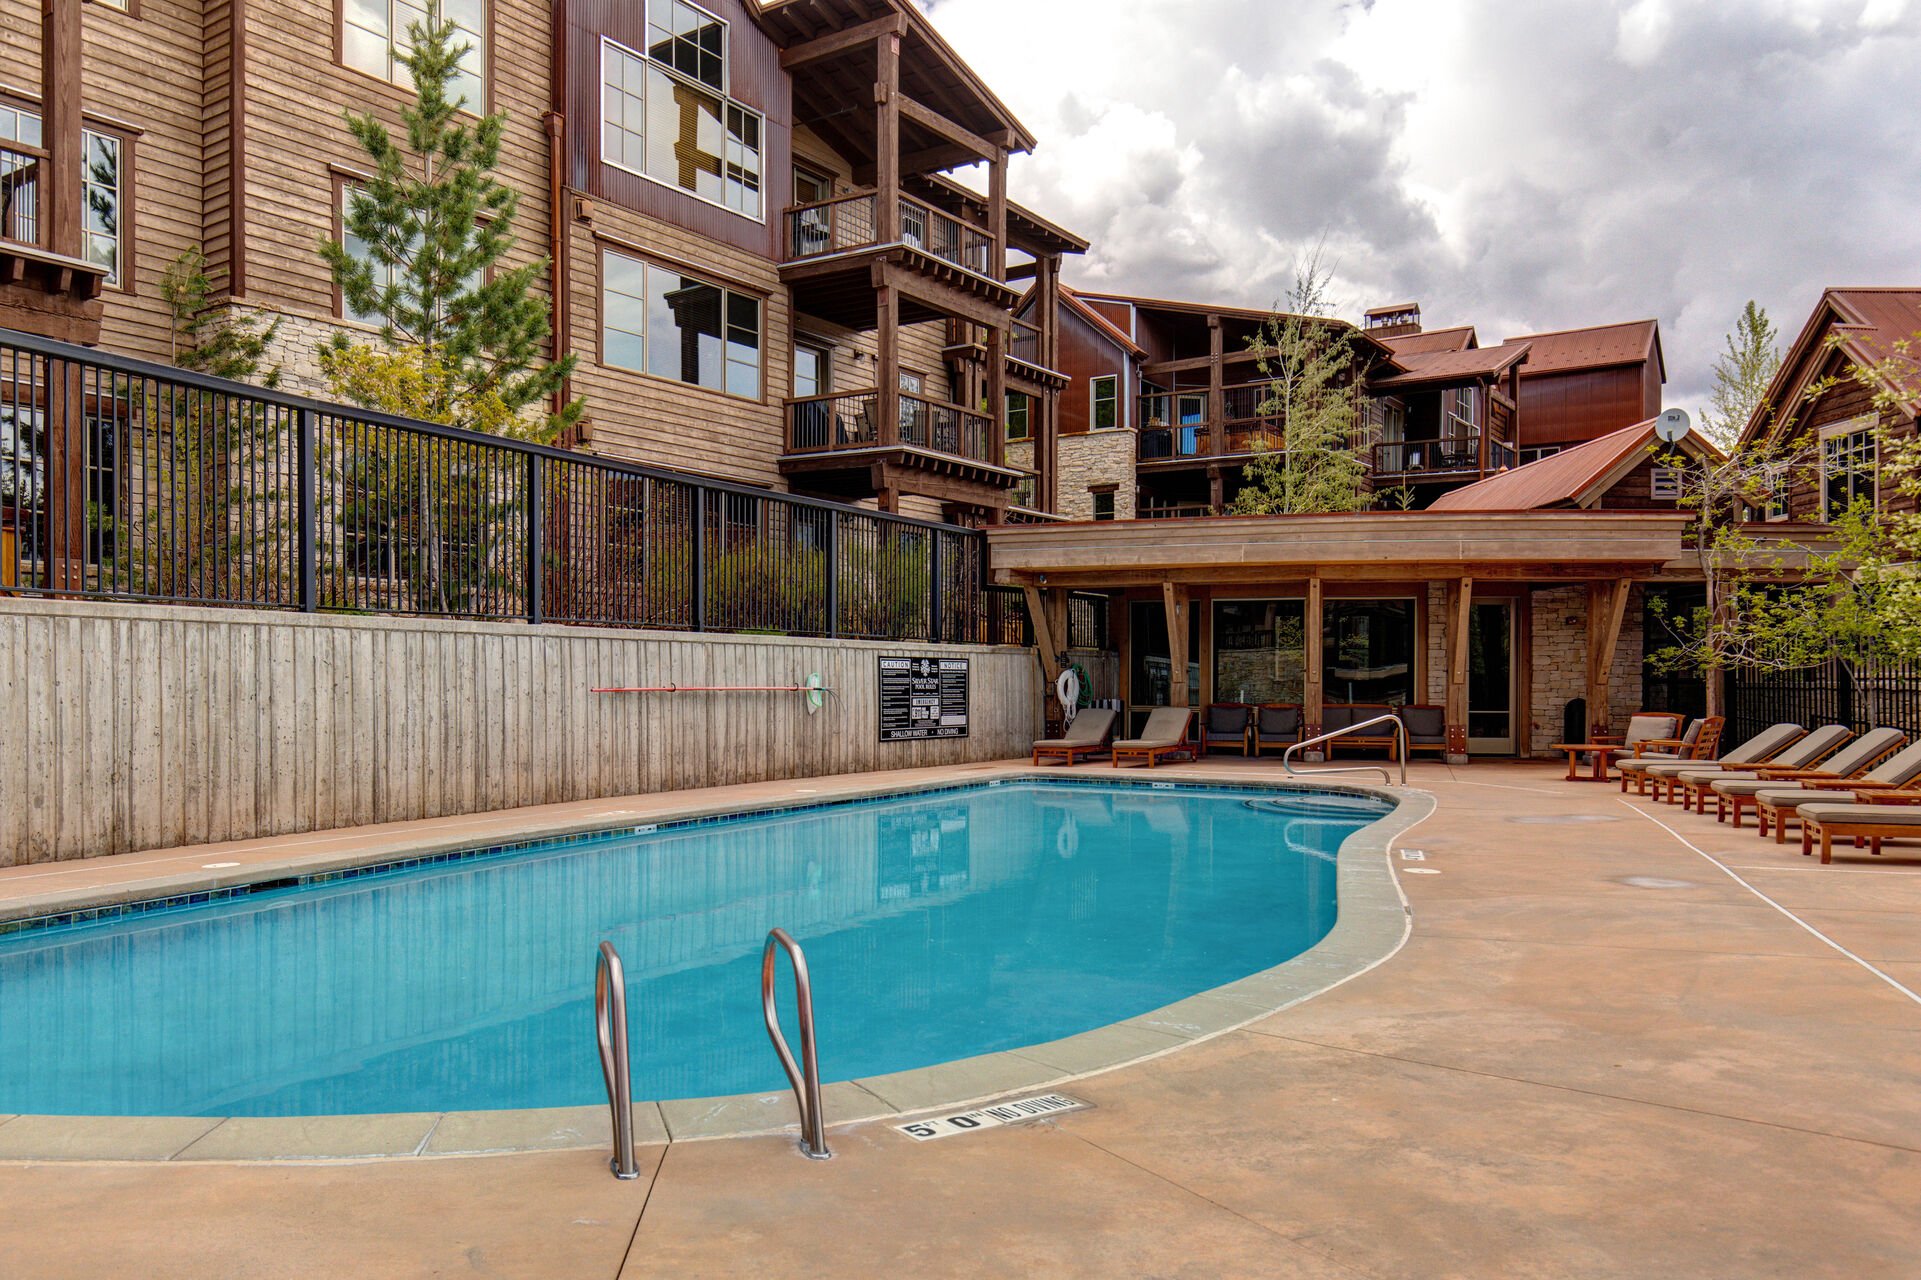 Silver Star Clubhouse Offers a Fitness Facility, Heated Pool and Hot Tub Open Year-round